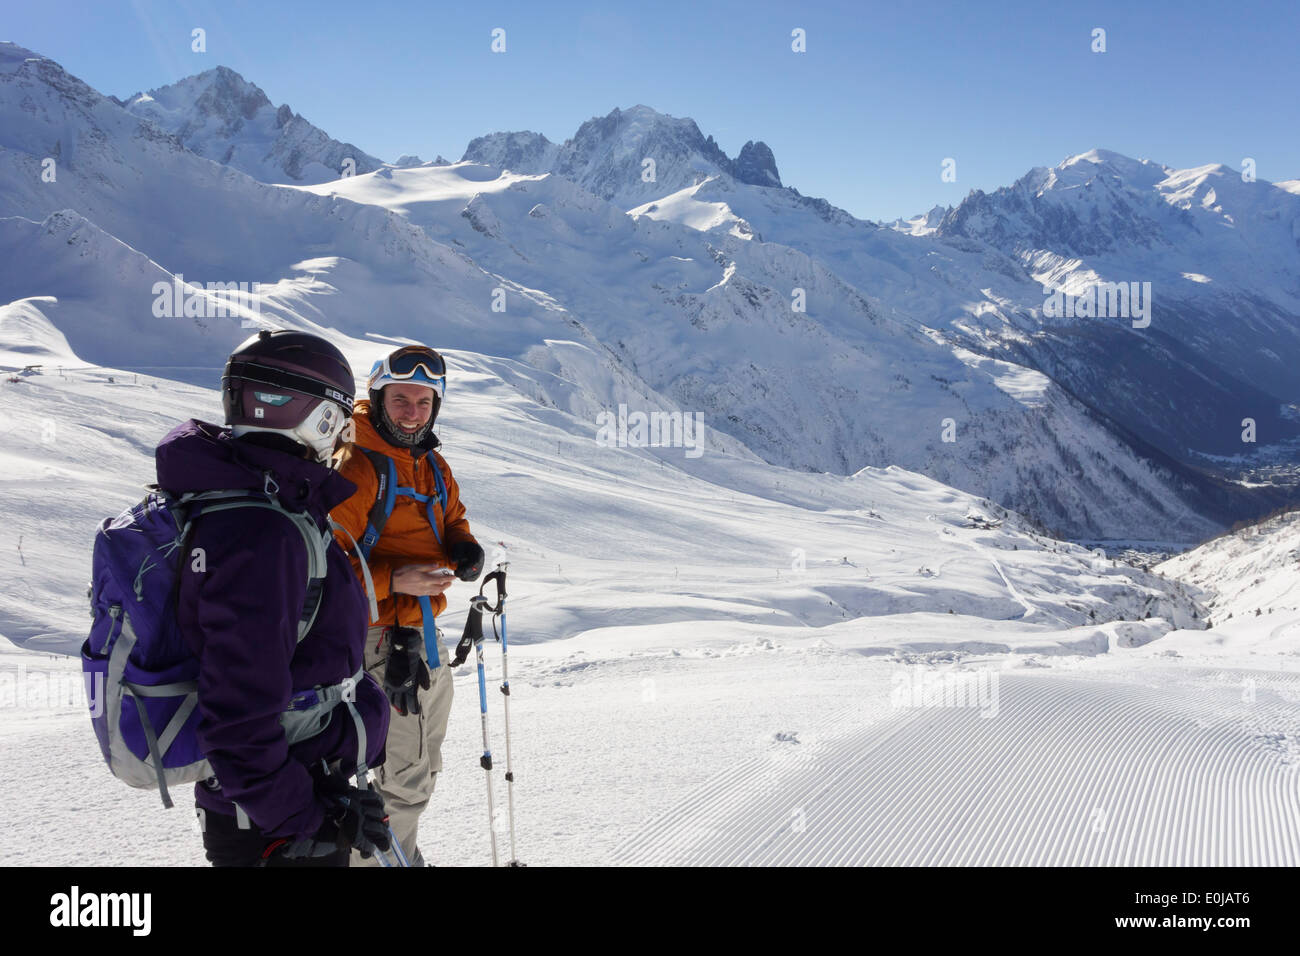 Two skiers on snow slopes in the French Alps at resort of Le Tour, Chamonix-Mont-Blanc, Haute Savoie, Rhone-Alpes, France, Europe. Stock Photo